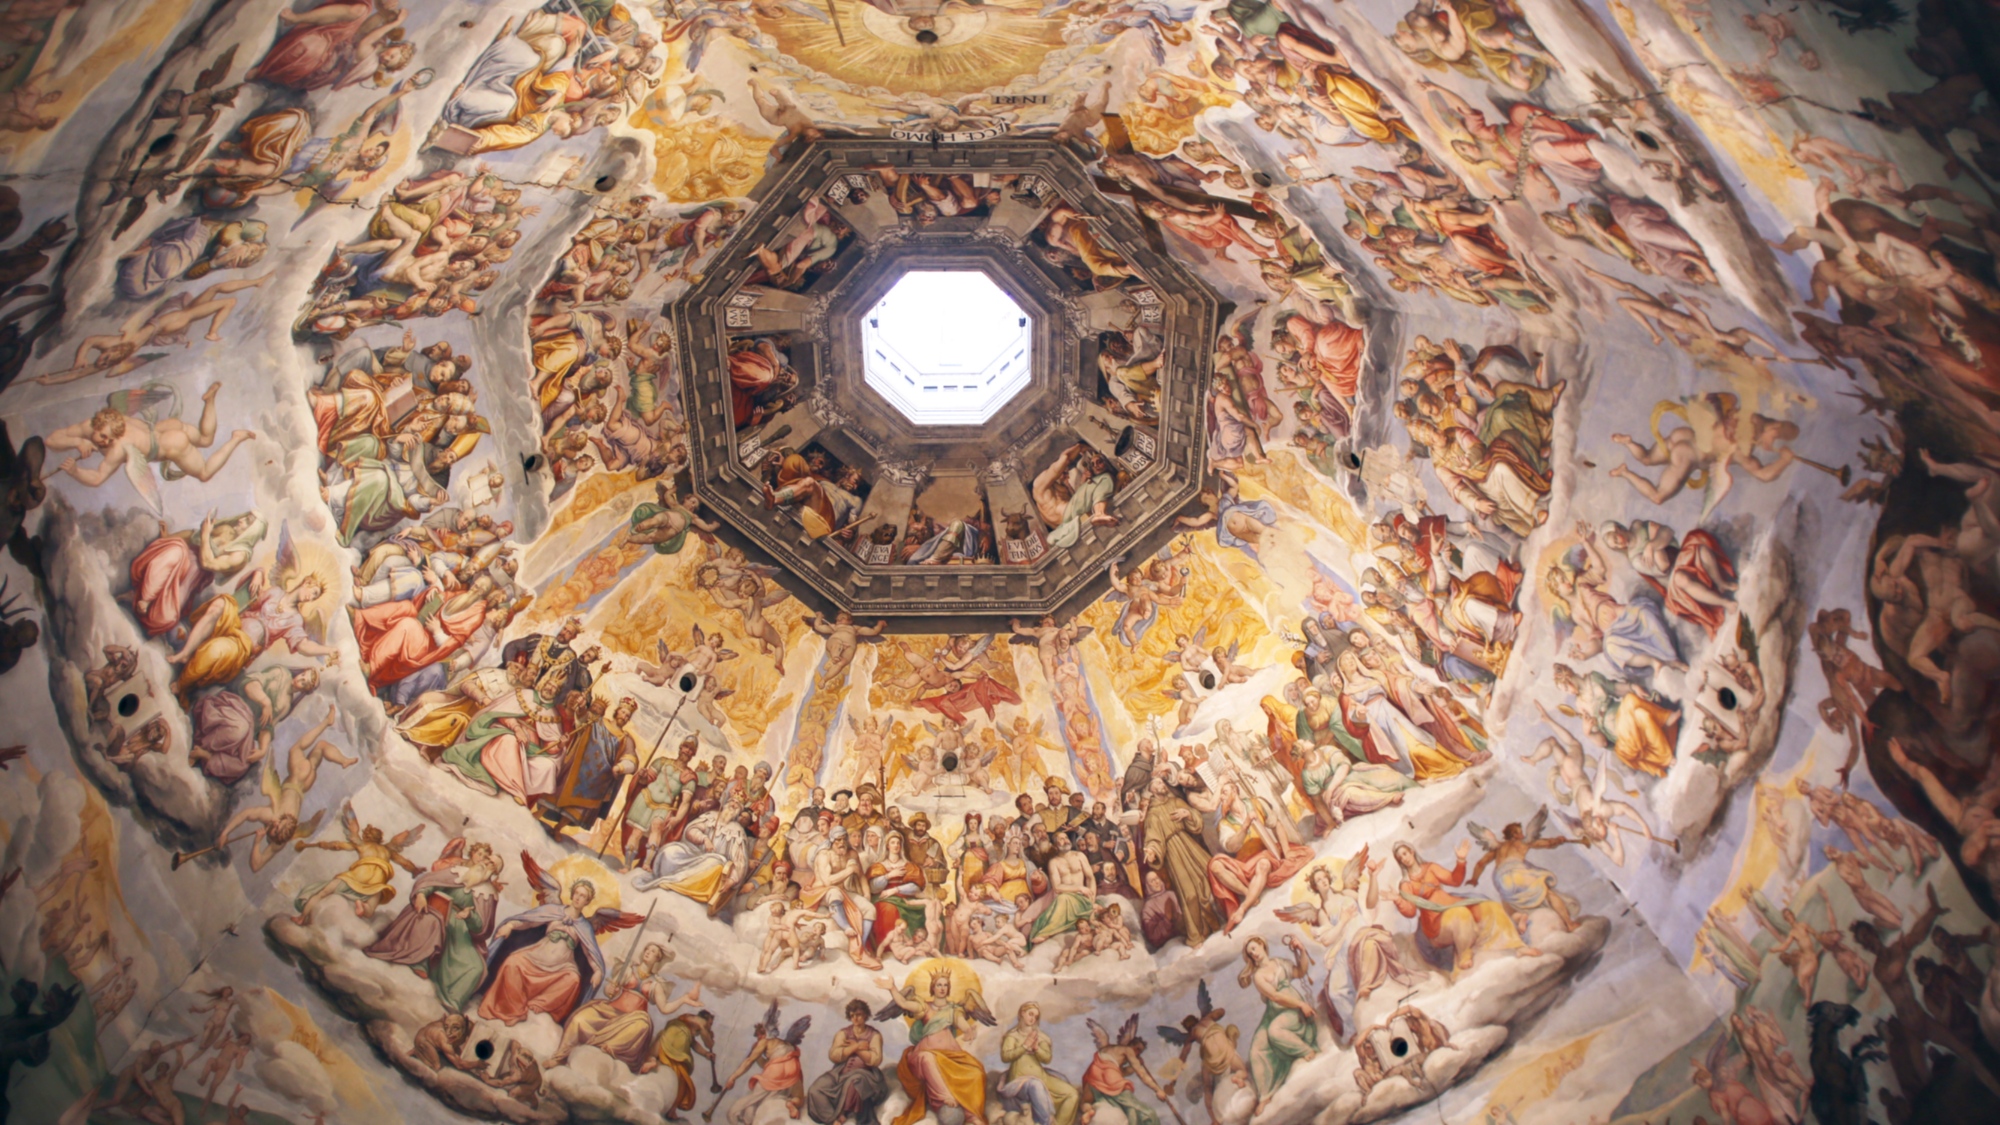 The interior of the Dome with the Universal Judgement